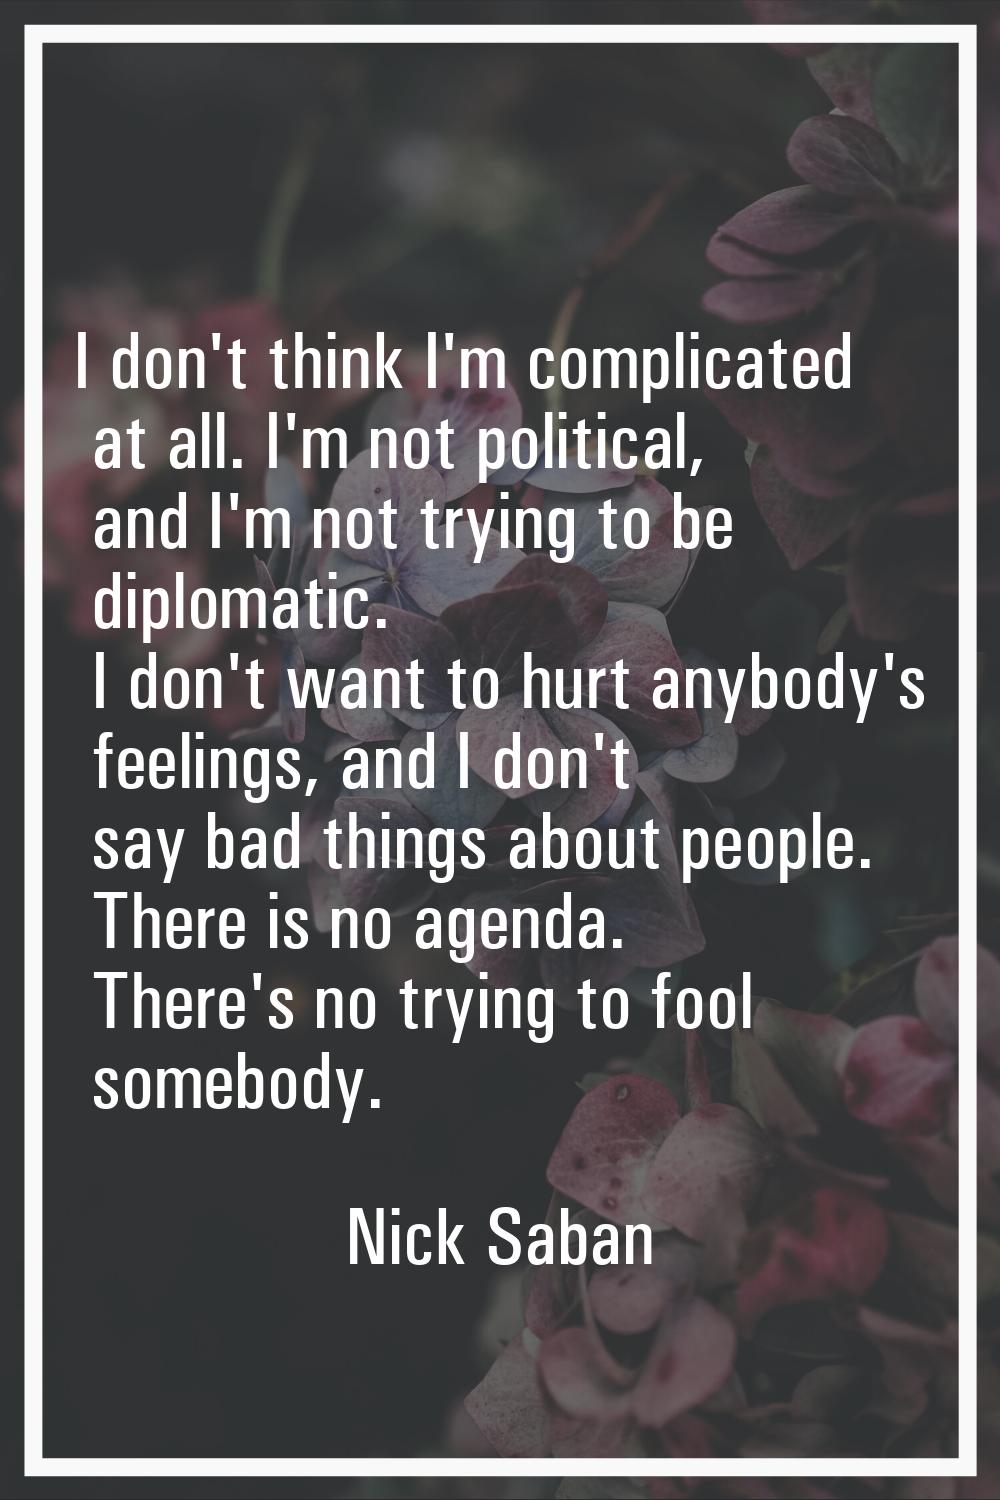 I don't think I'm complicated at all. I'm not political, and I'm not trying to be diplomatic. I don